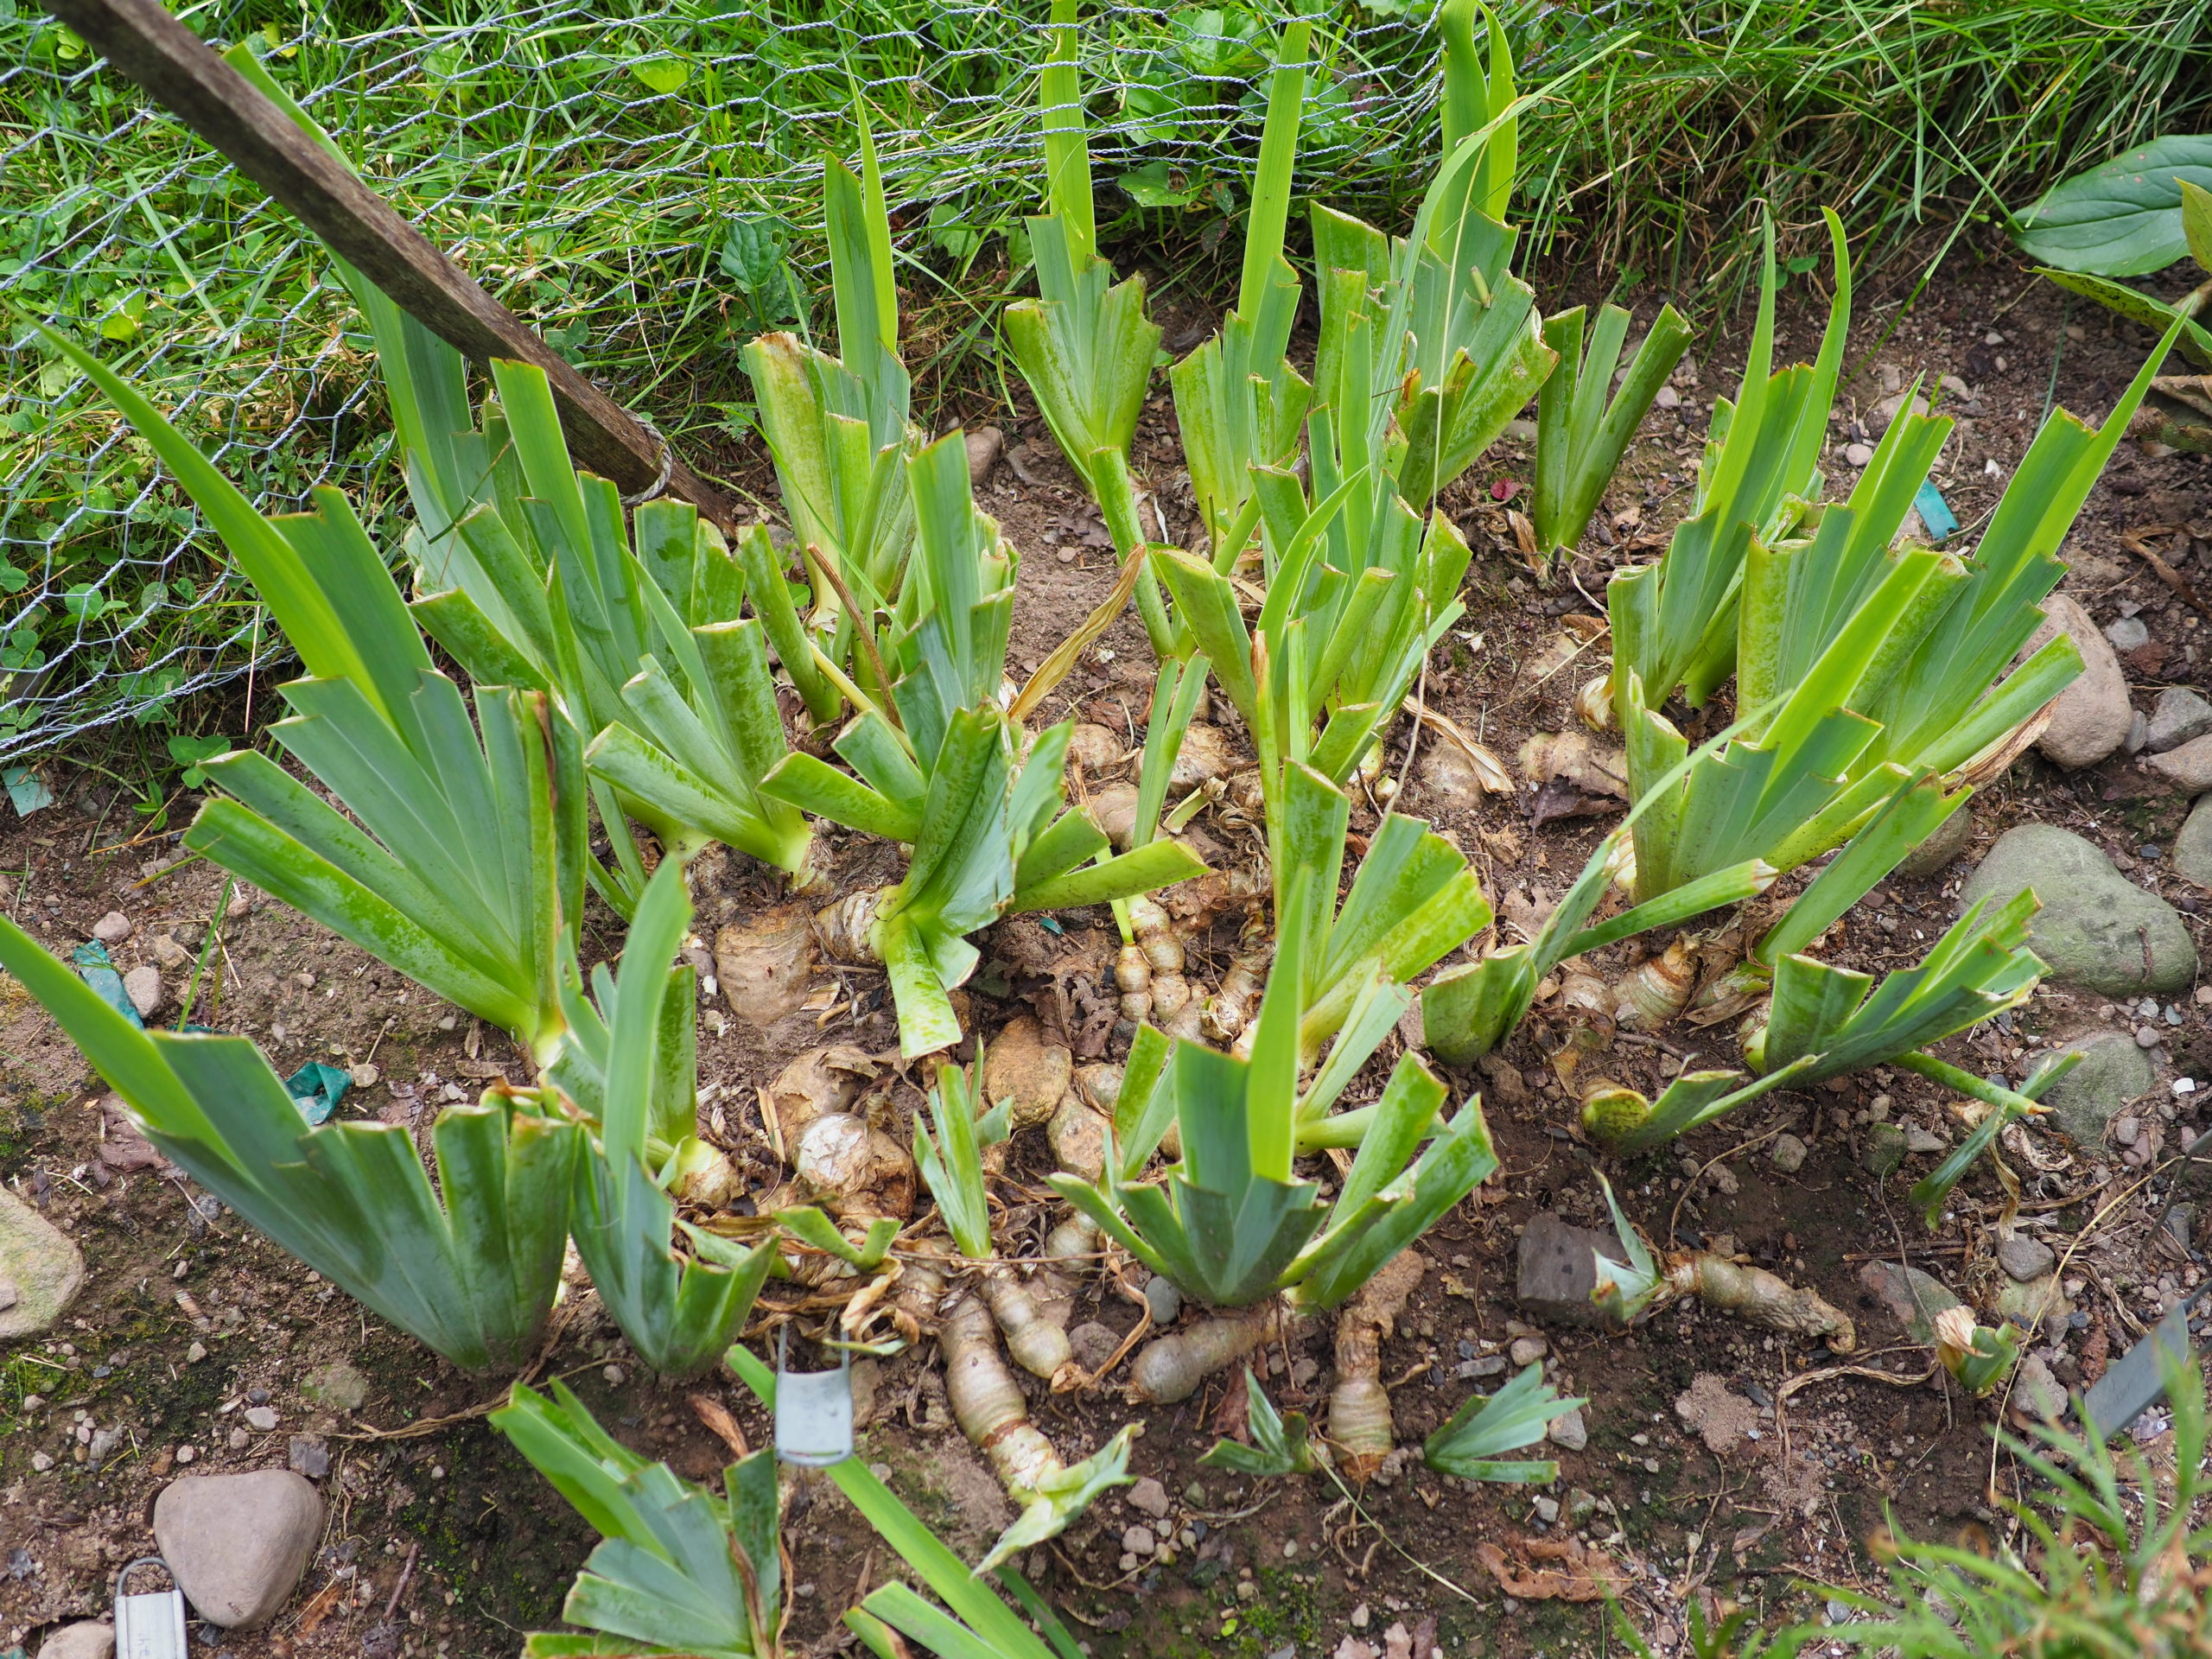 A trial bed of iris whose foliage has just been reduced to 6-inch-tall fans. Note how congested the roots are (time to transplant) and how they are only buried to half their diameter.